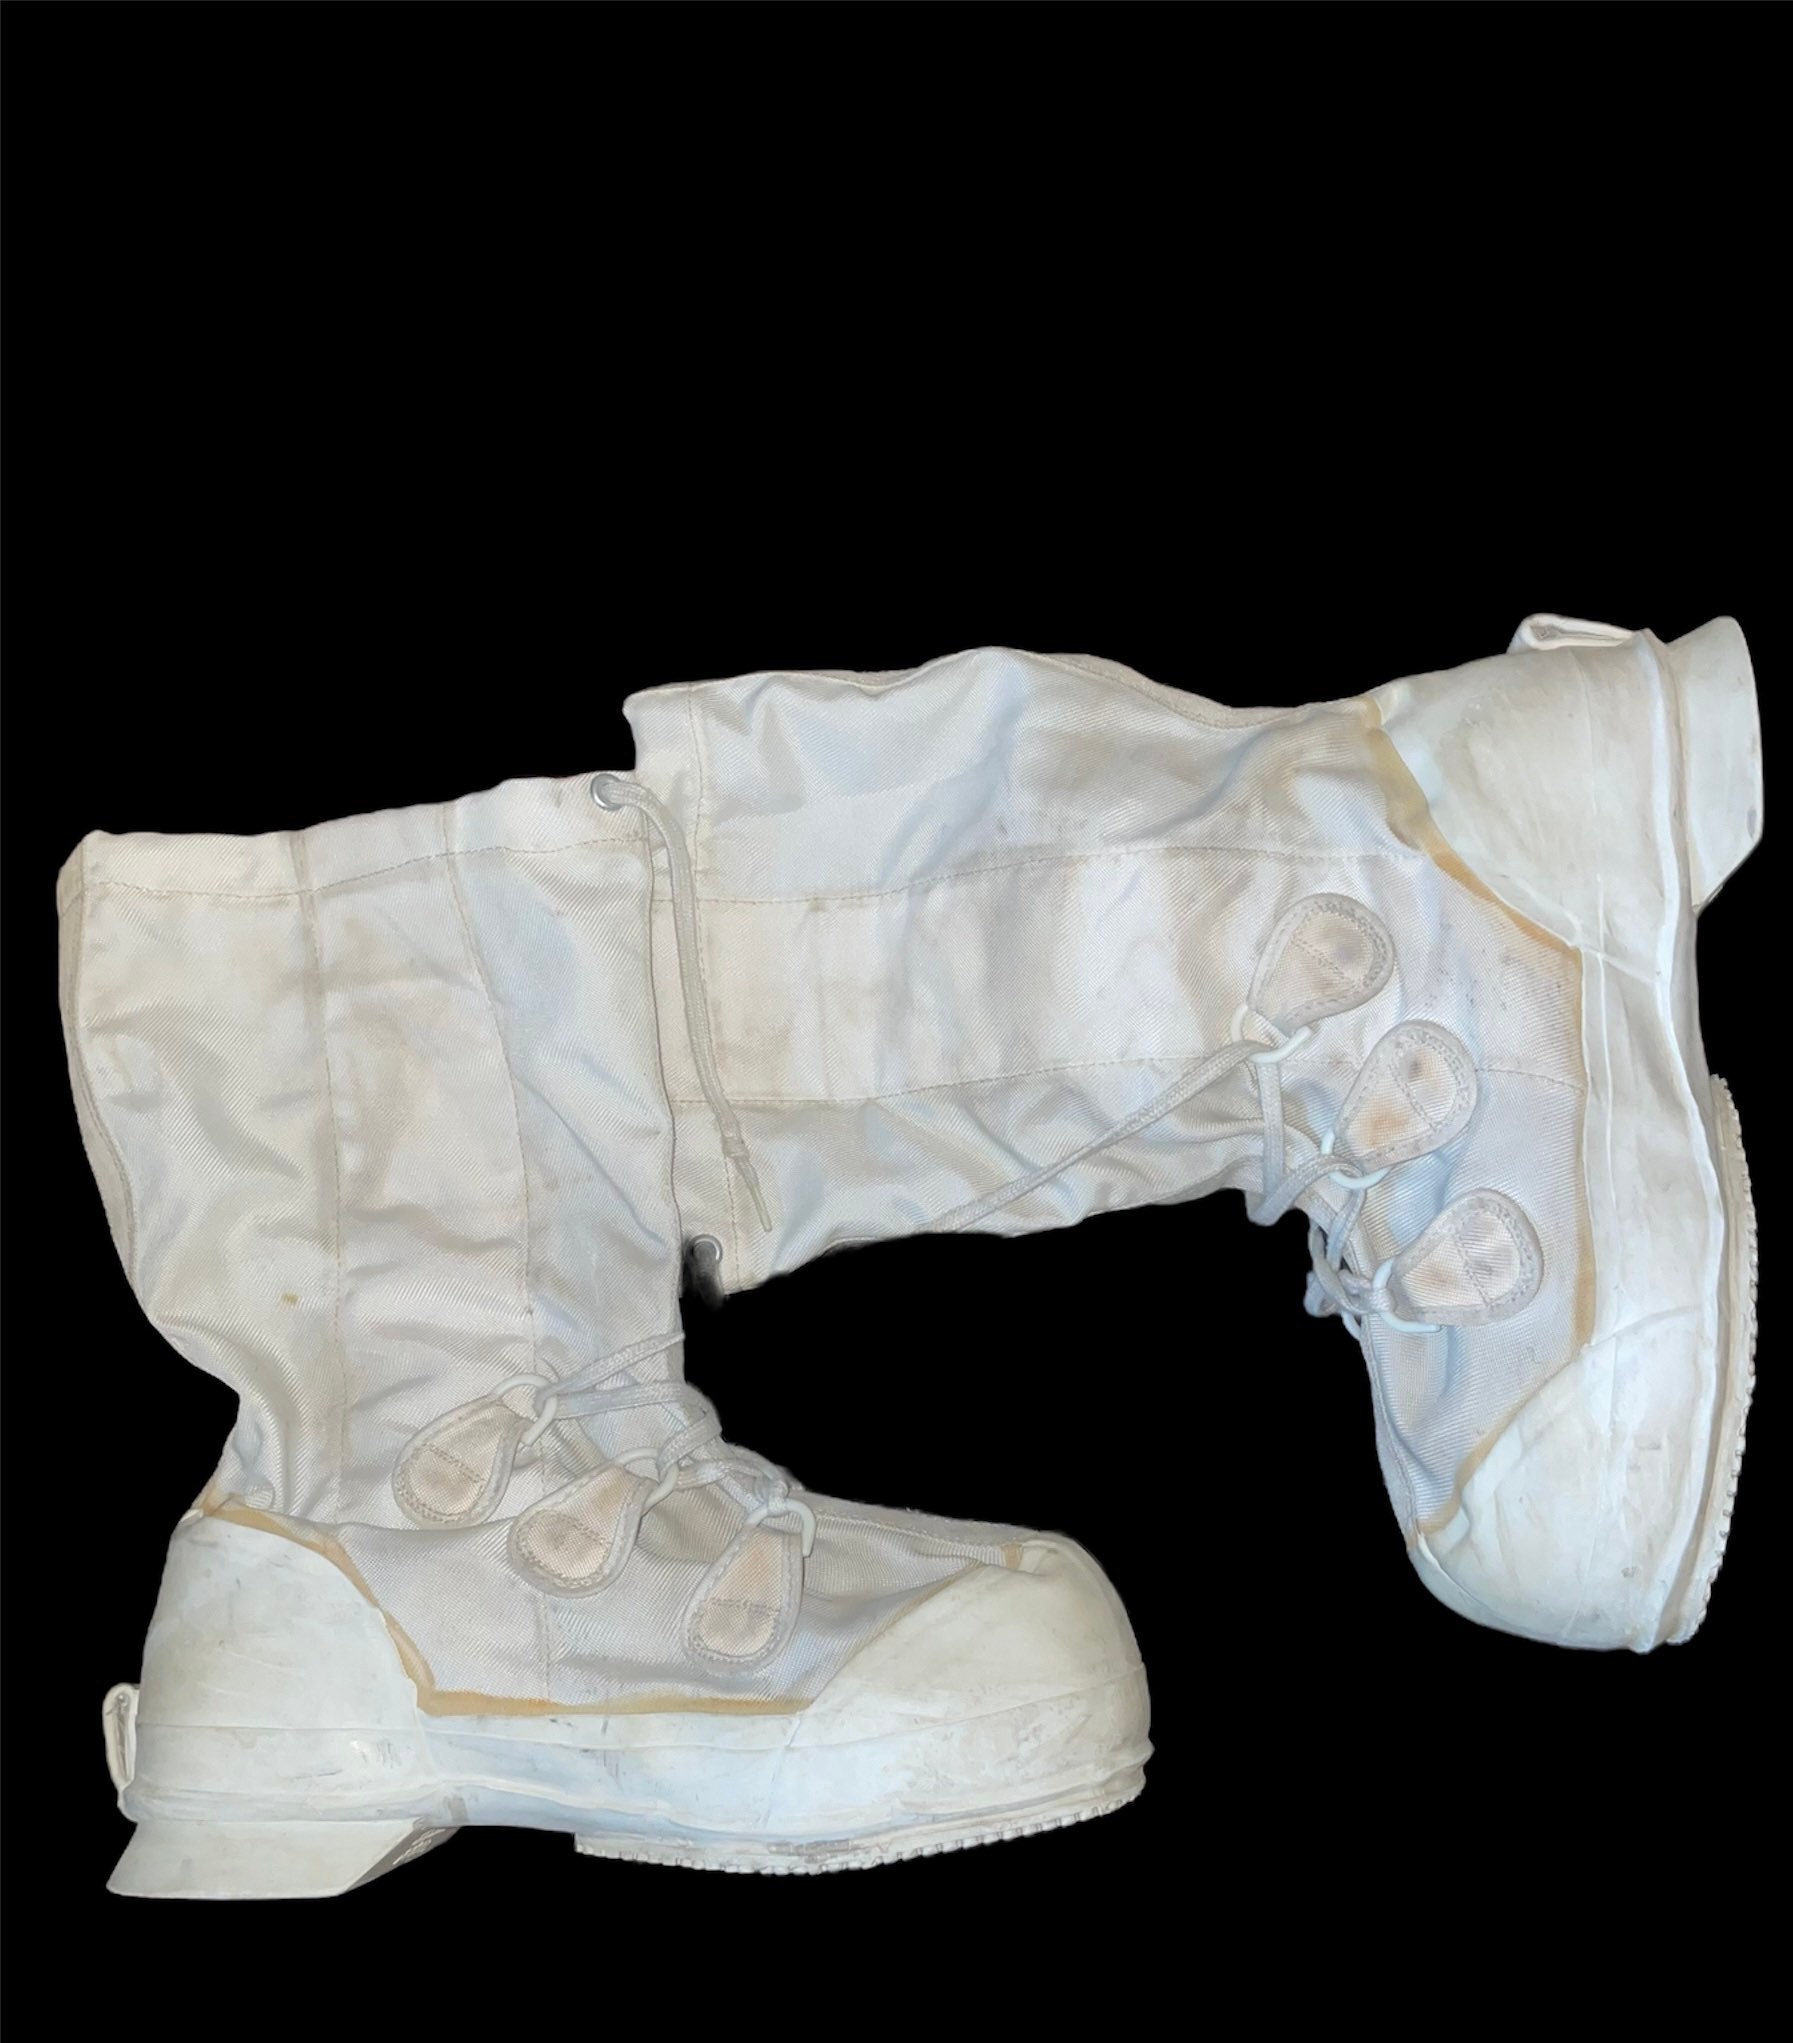 Canadian Armed Forces Arctic Bunny Boots